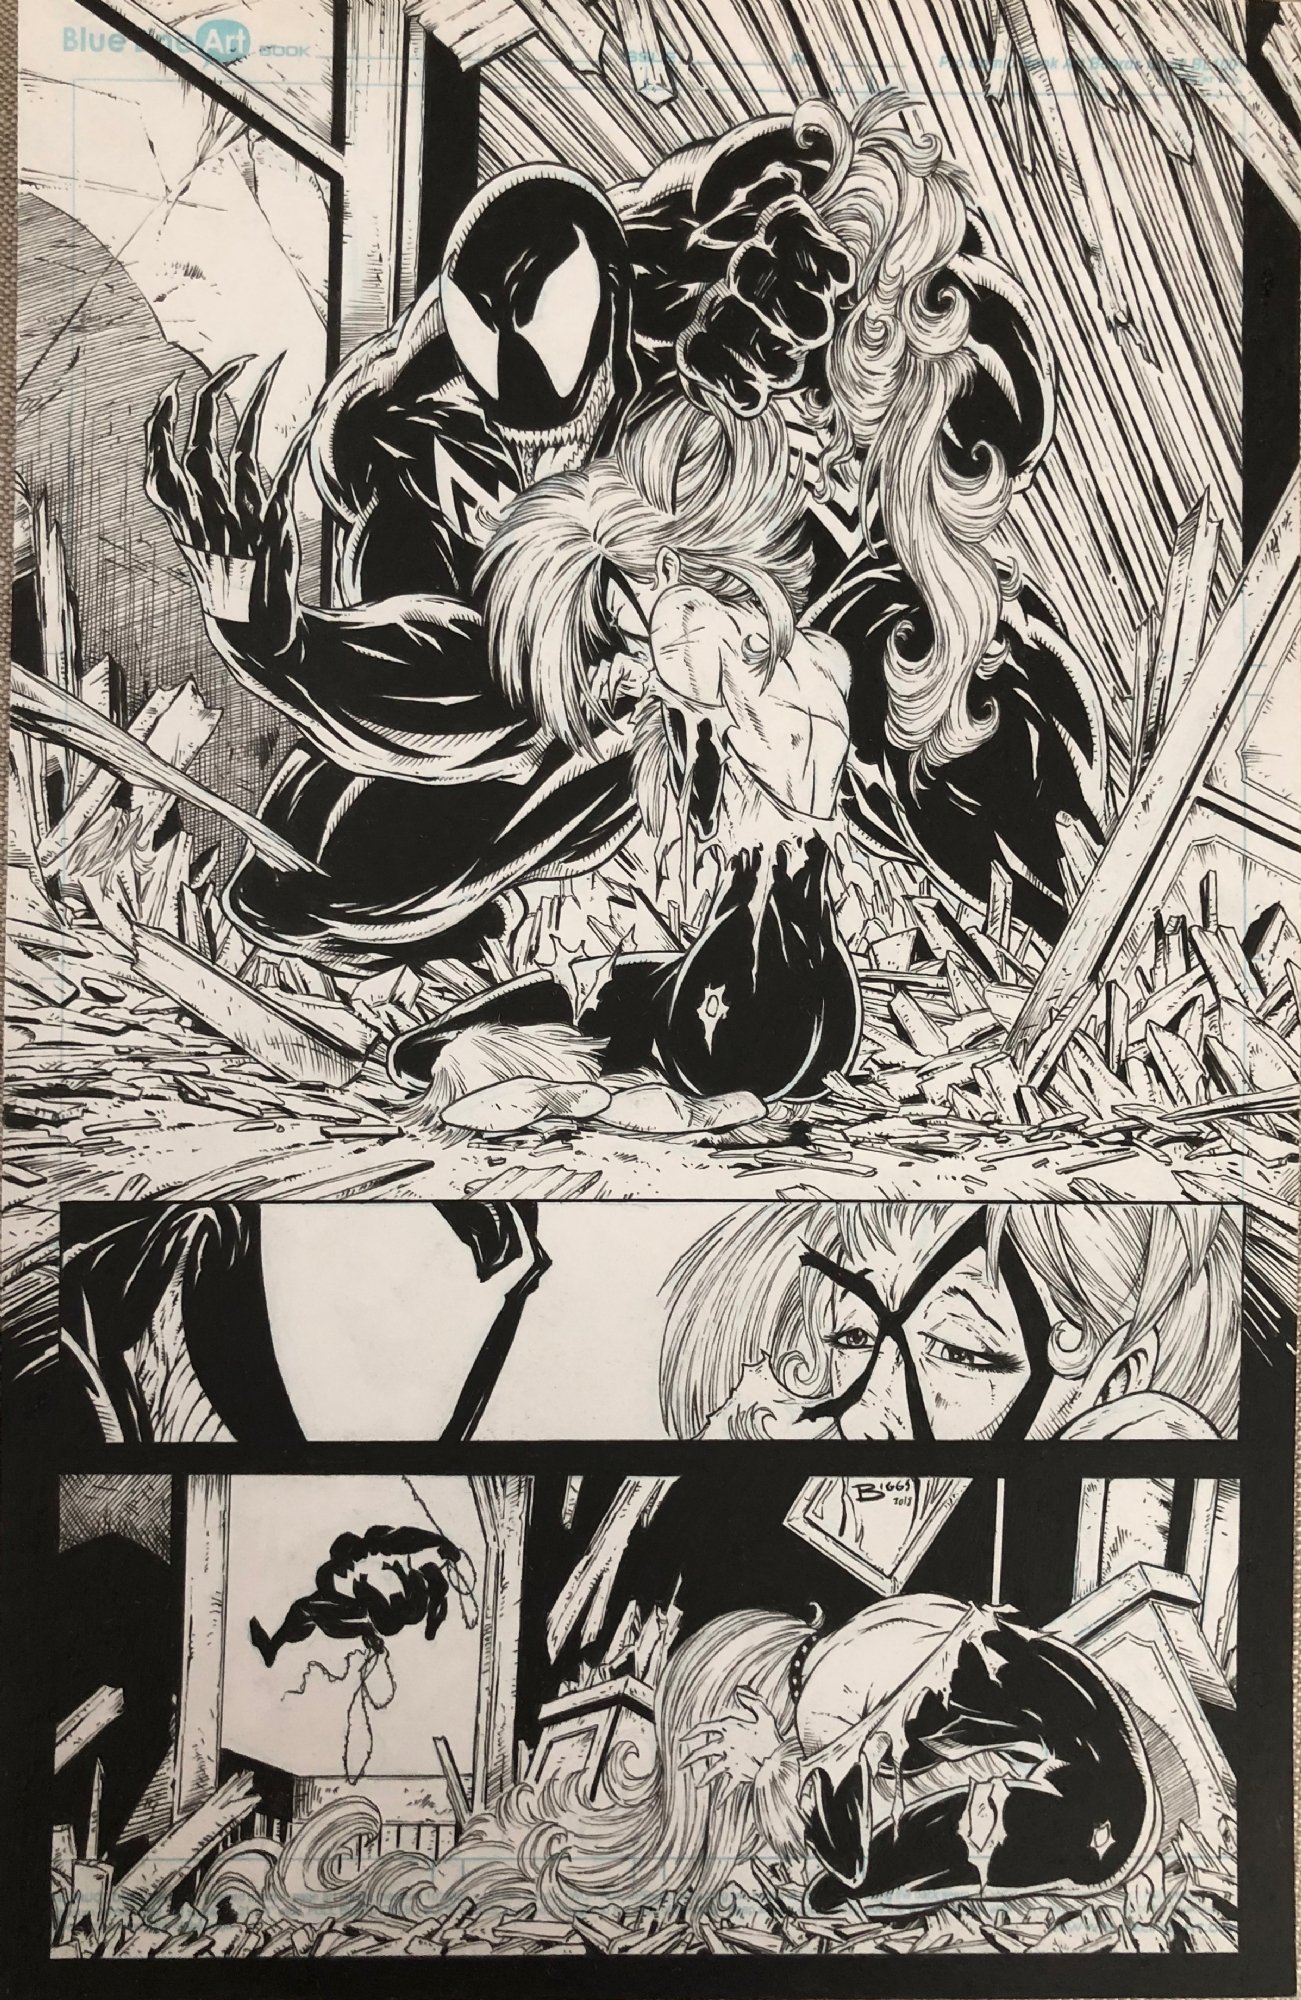 Homage to Todd McFarlane's Amazing Spider-Man #316 Page 13, in Robert W's  Spider-Man Comic Art Gallery Room